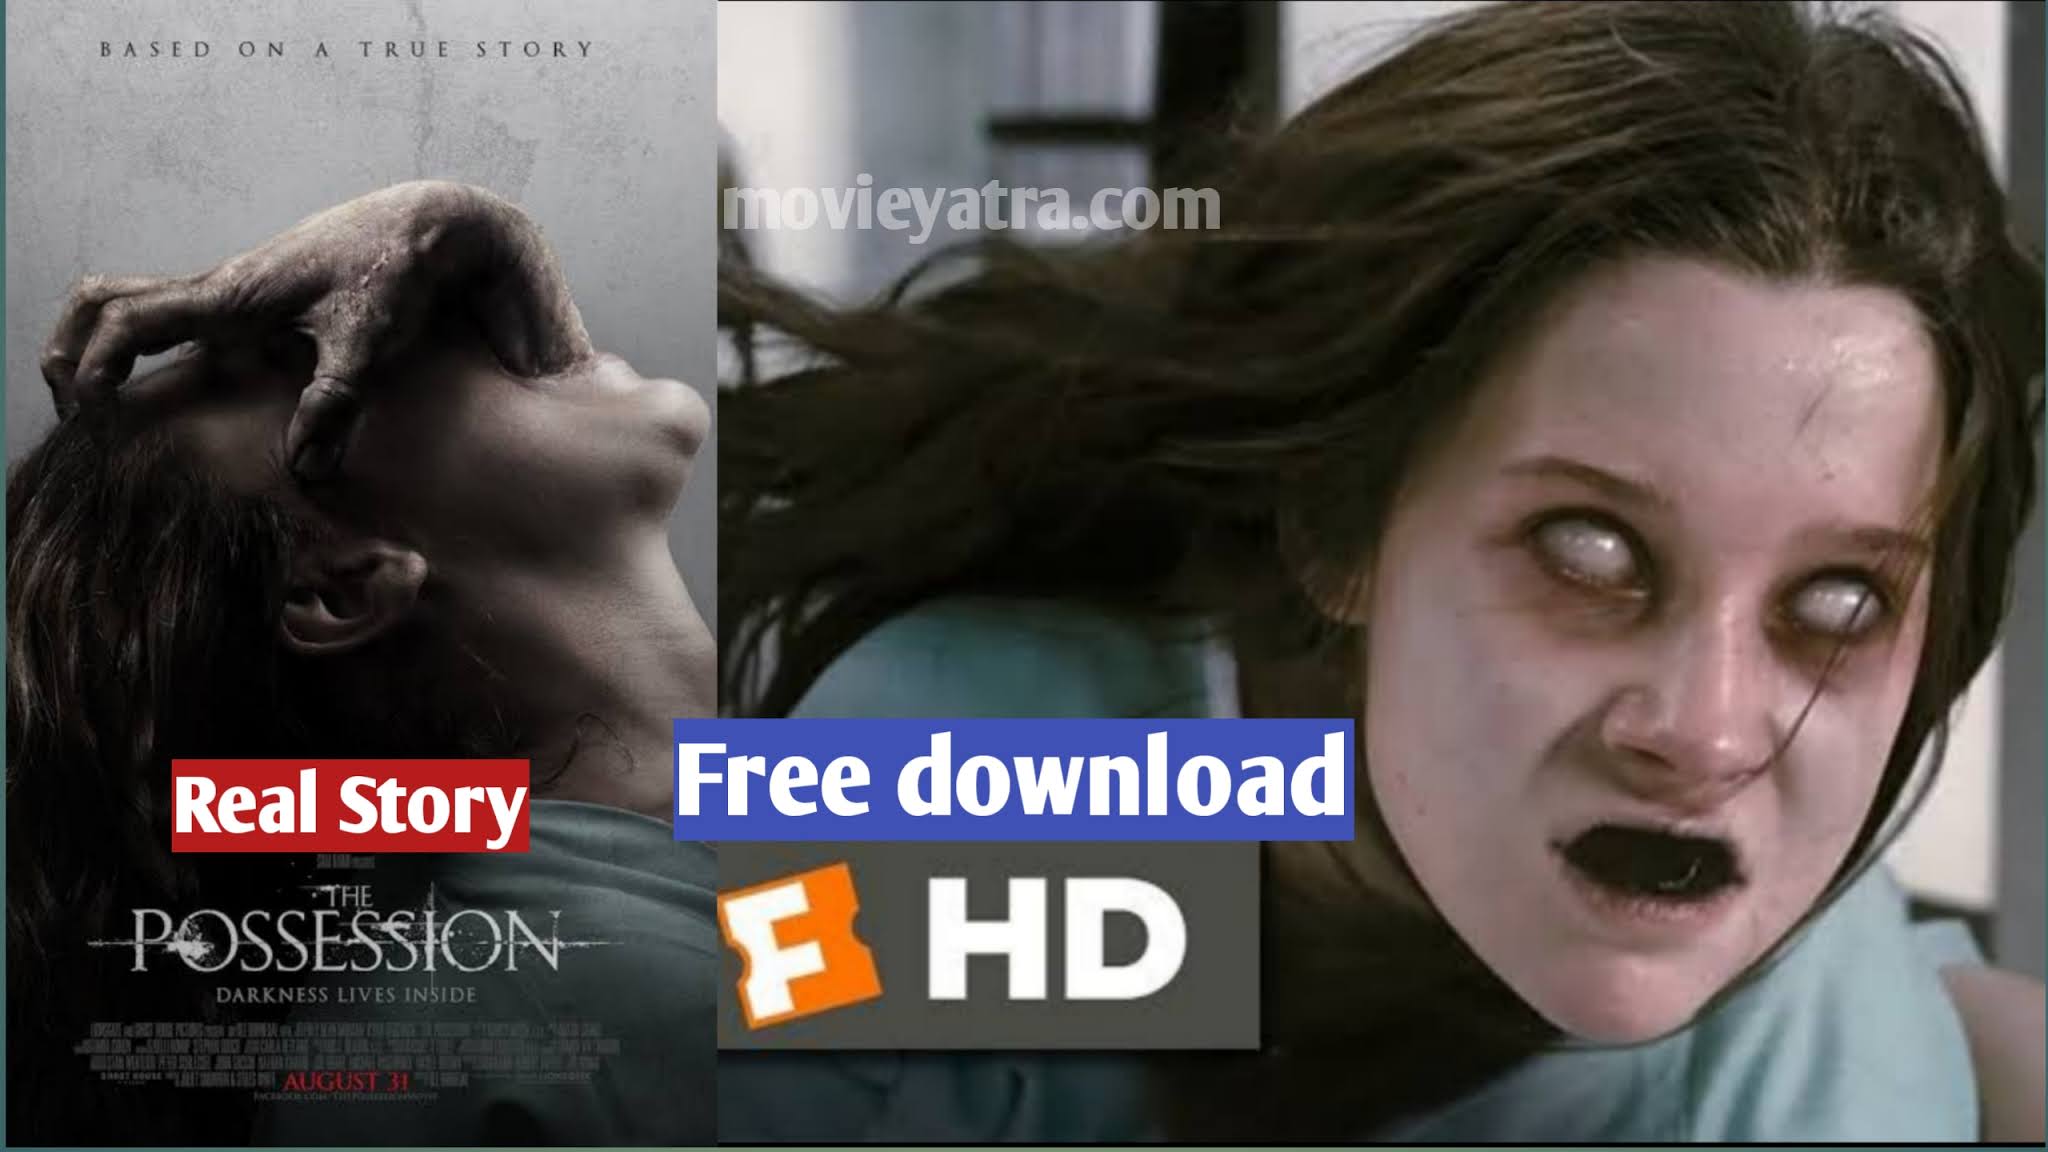 The Possession movie download in hindi language | The possession movie full review in hindi language  The Possession hindi dubbed language free downlo